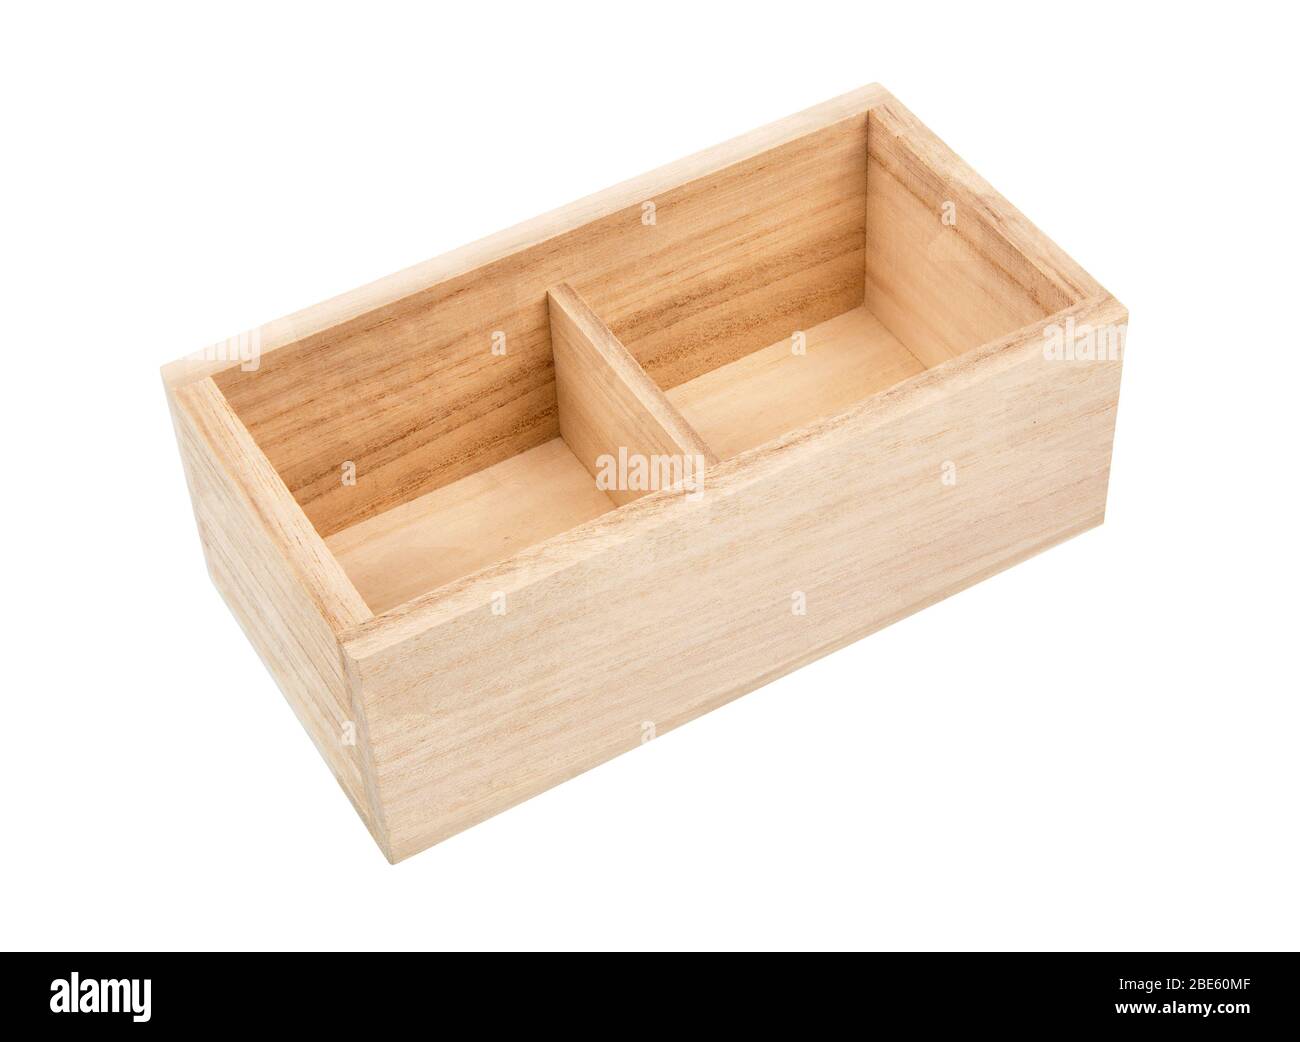 Wooden box isolated on the white background. Open box. Stock Photo